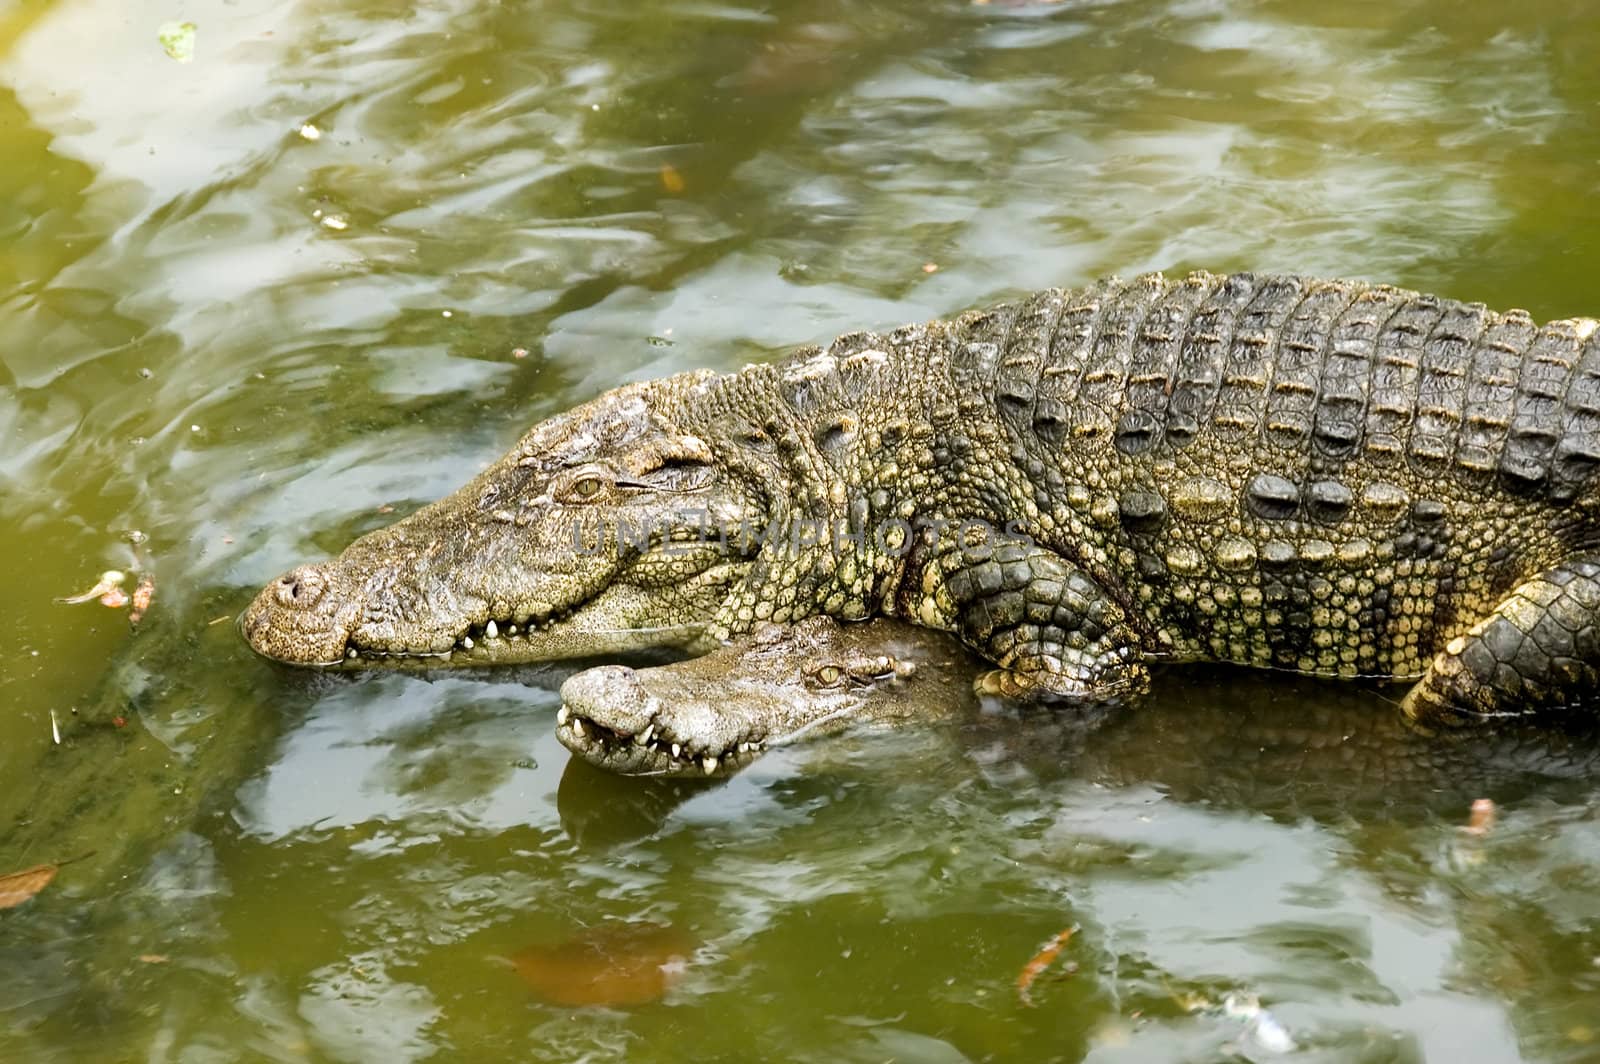 mating crocodiles by jsompinm